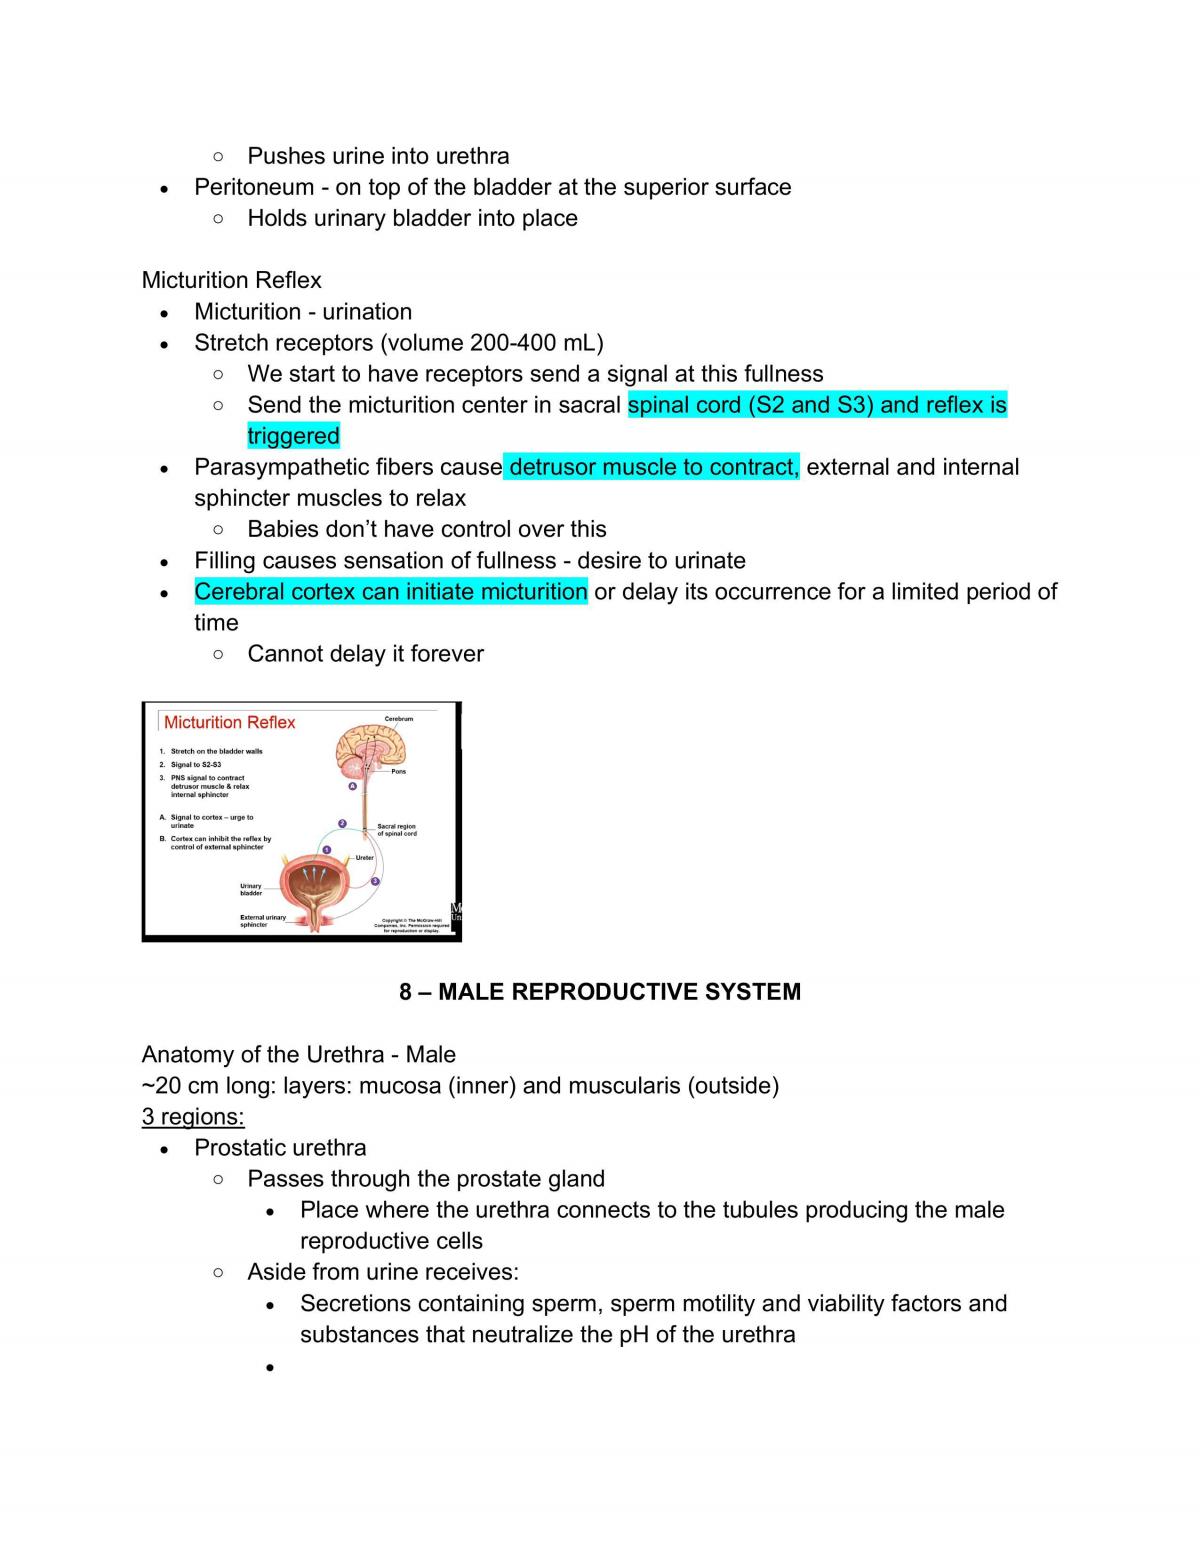 Complete Notes Forhuman Anatomy And Physiology Ii Kinesiol 2yy3 Human Anatomy And Physiology 6833